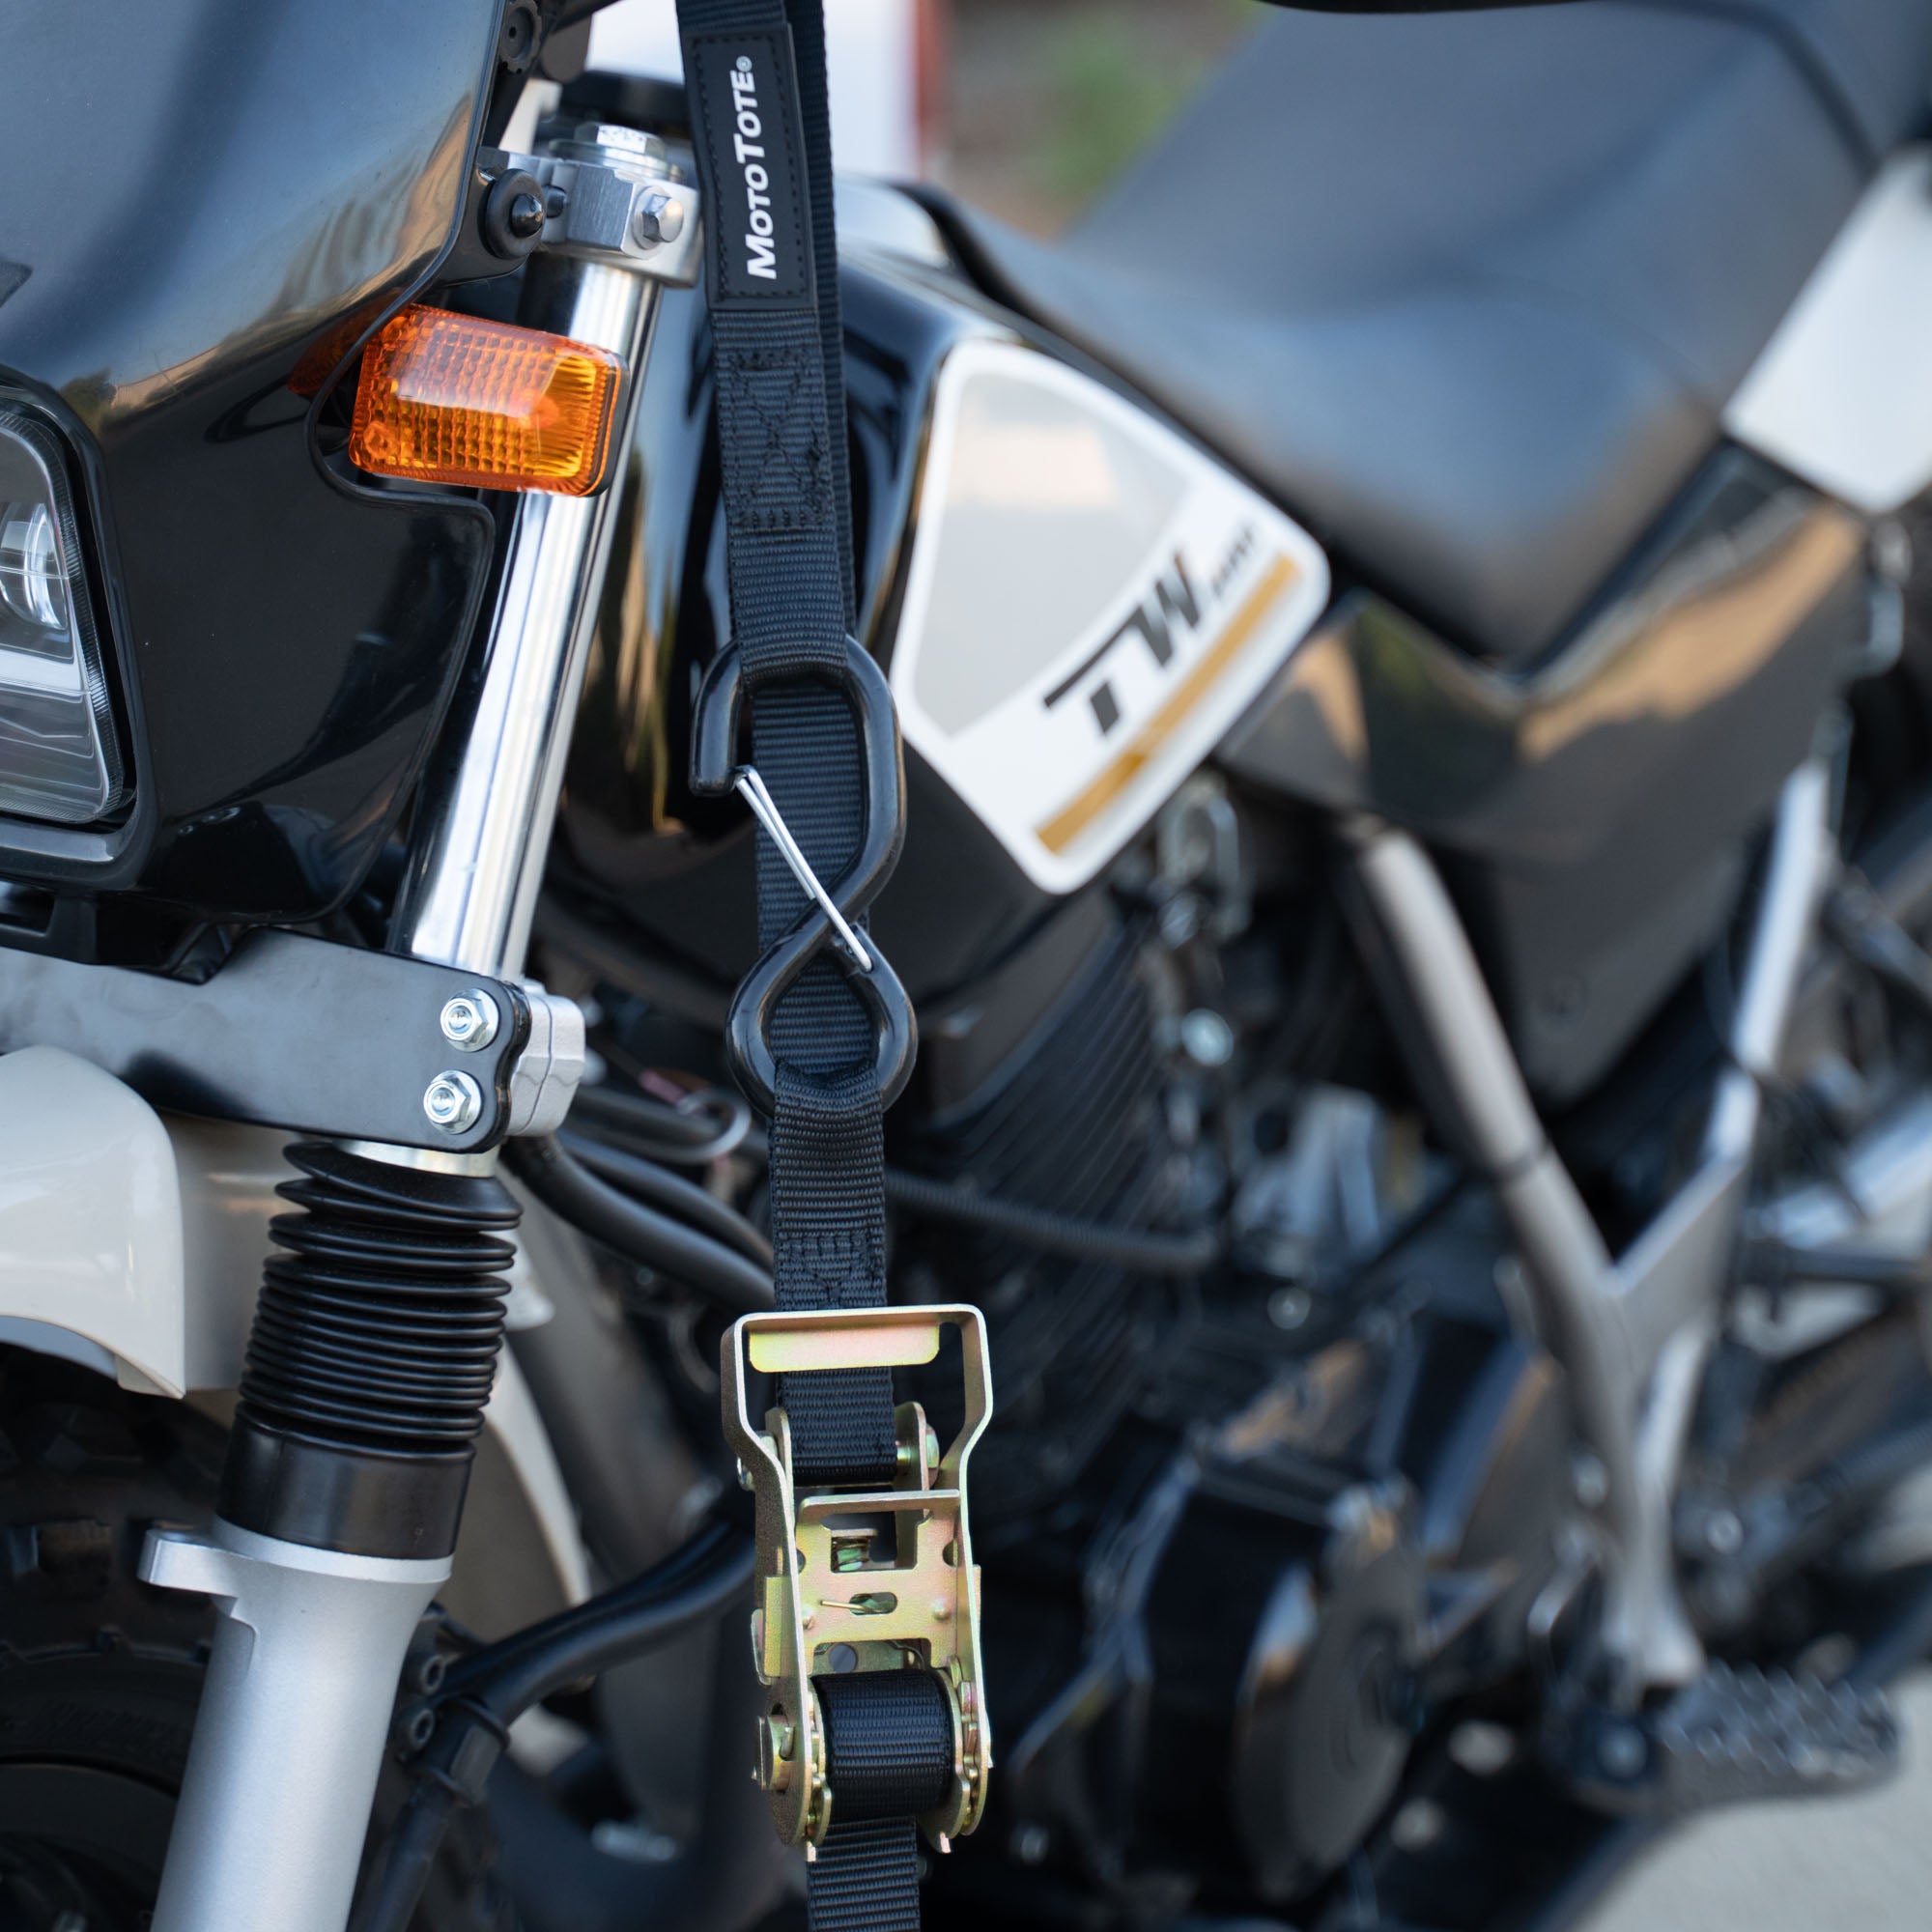 Introducing MotoTote's Innovative Tie Downs for Motorcycle Hitch Carriers